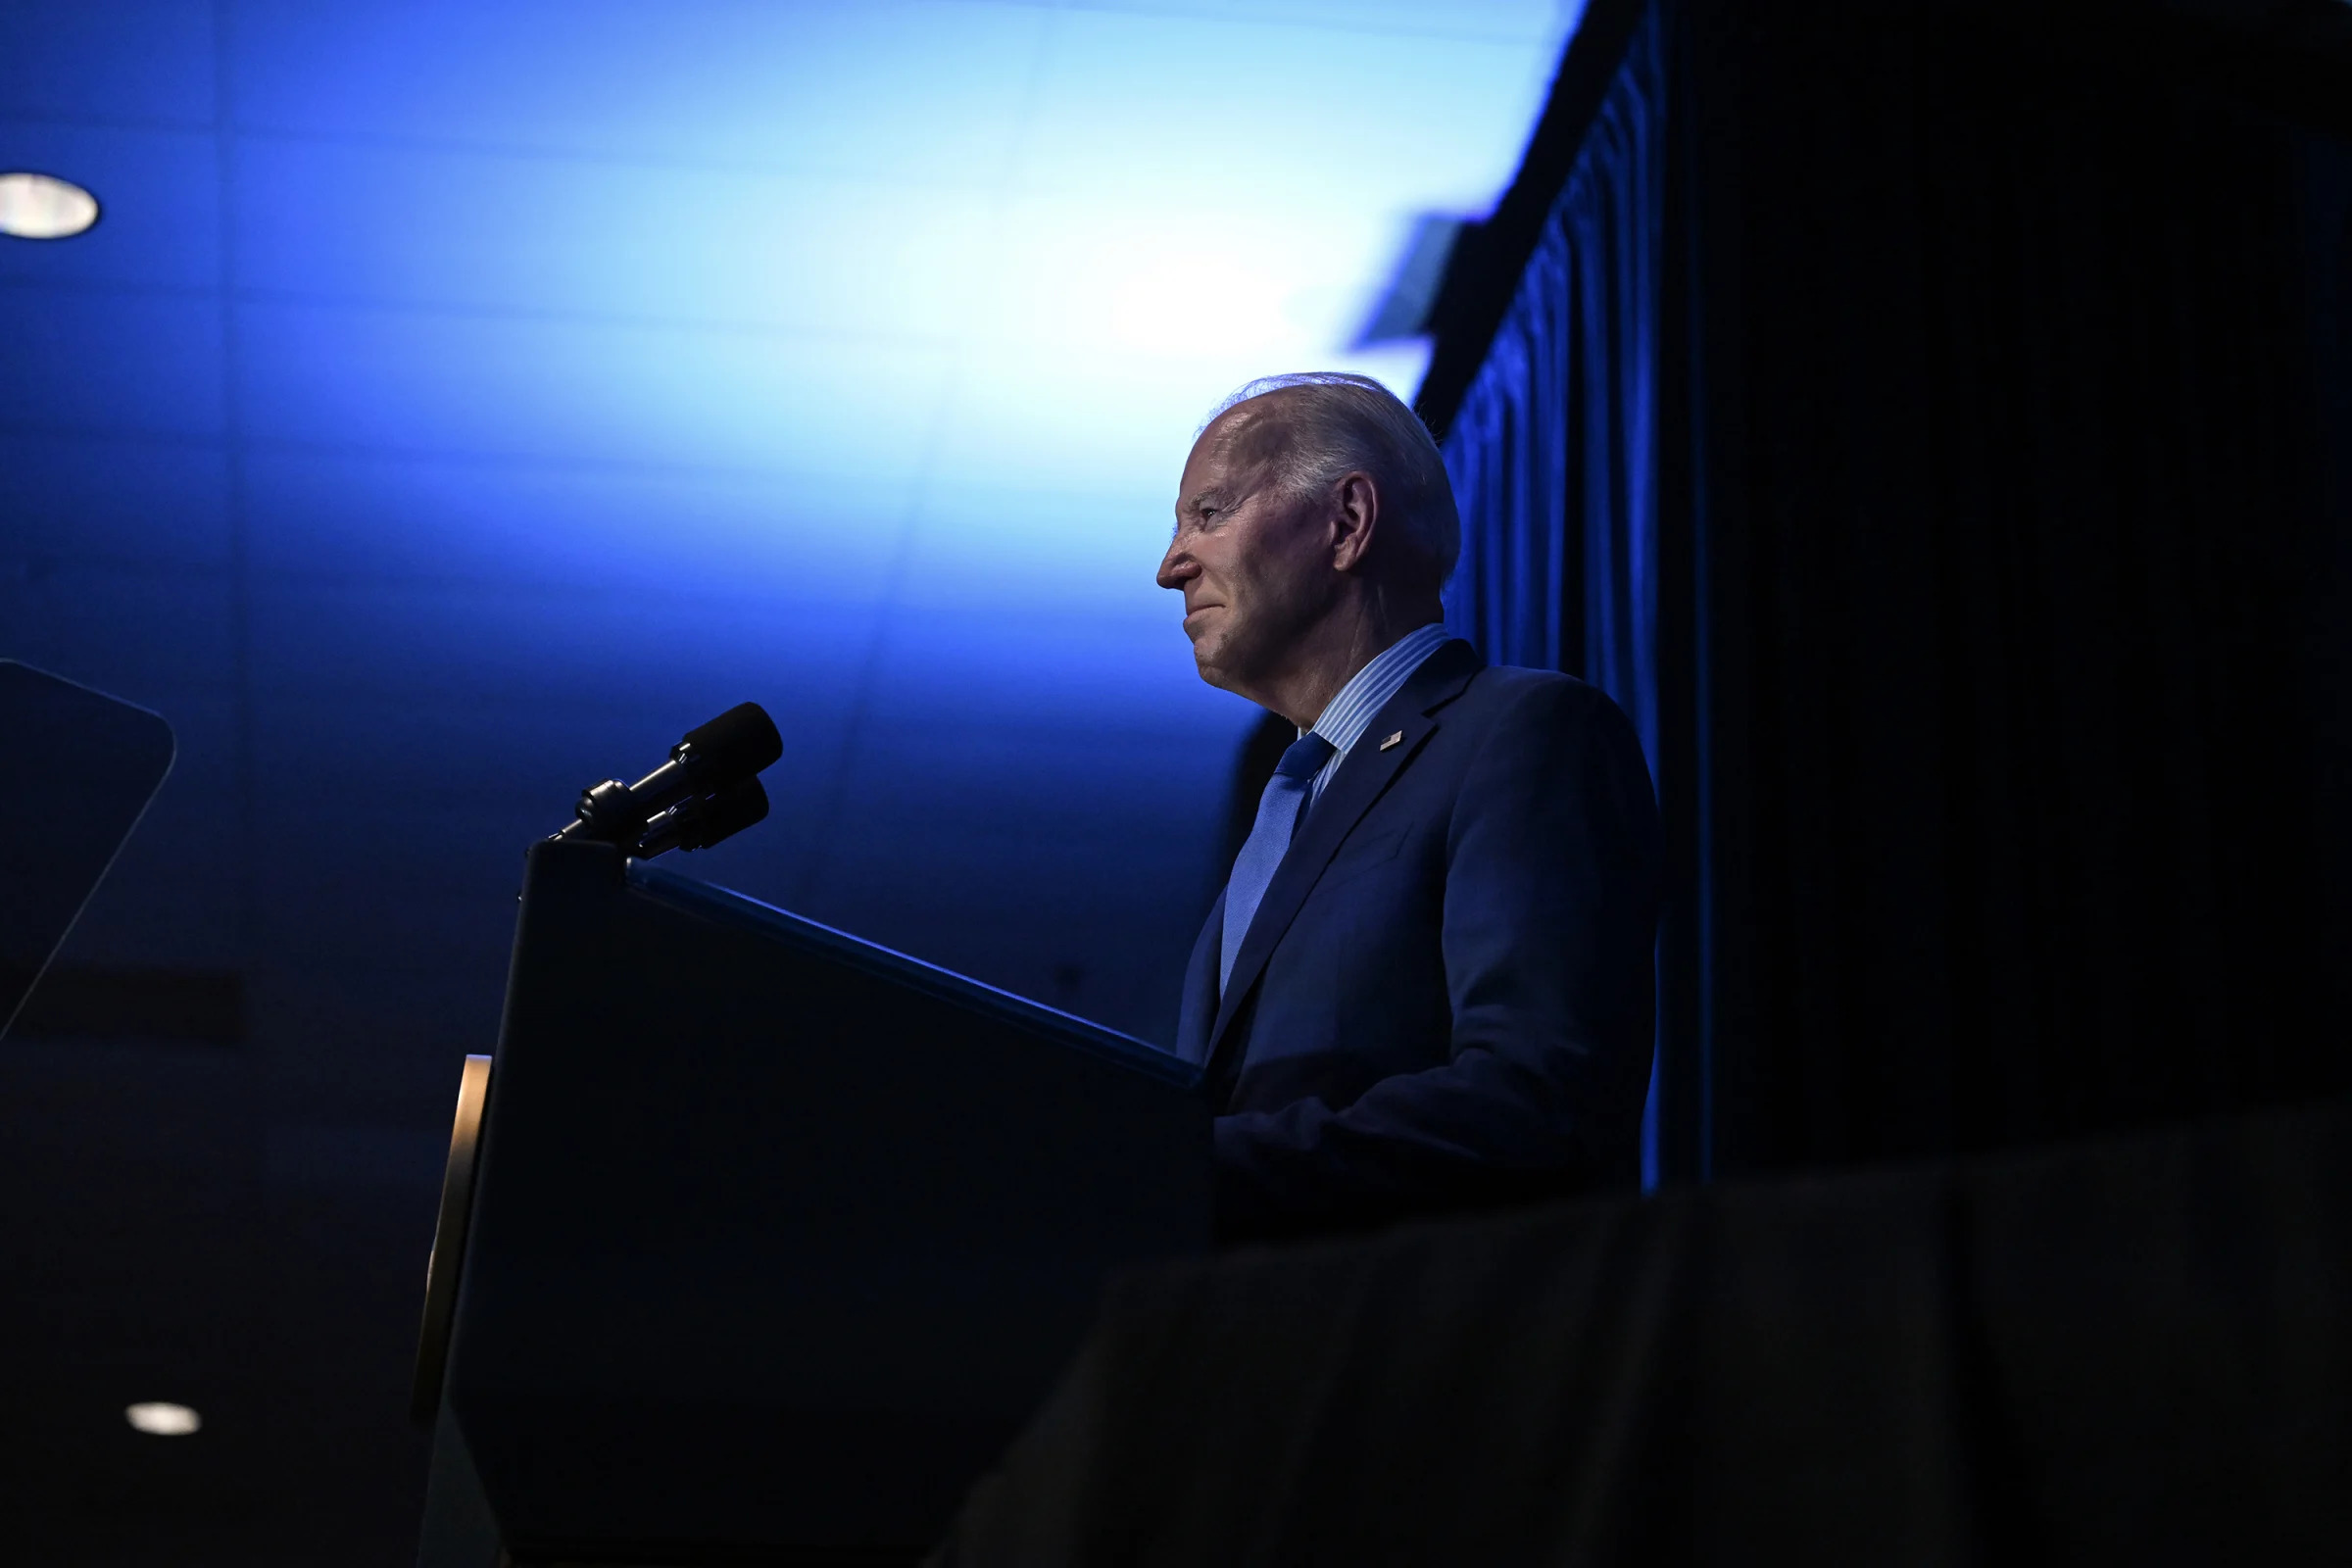 U.S. President Joe Biden delivers remarks at the South Carolina Democratic Party (SCDP) First in the Nation Celebration in Columbia, S.C.,  on  Jan. 27, 2024. (Kenny Holston/The New York Times)